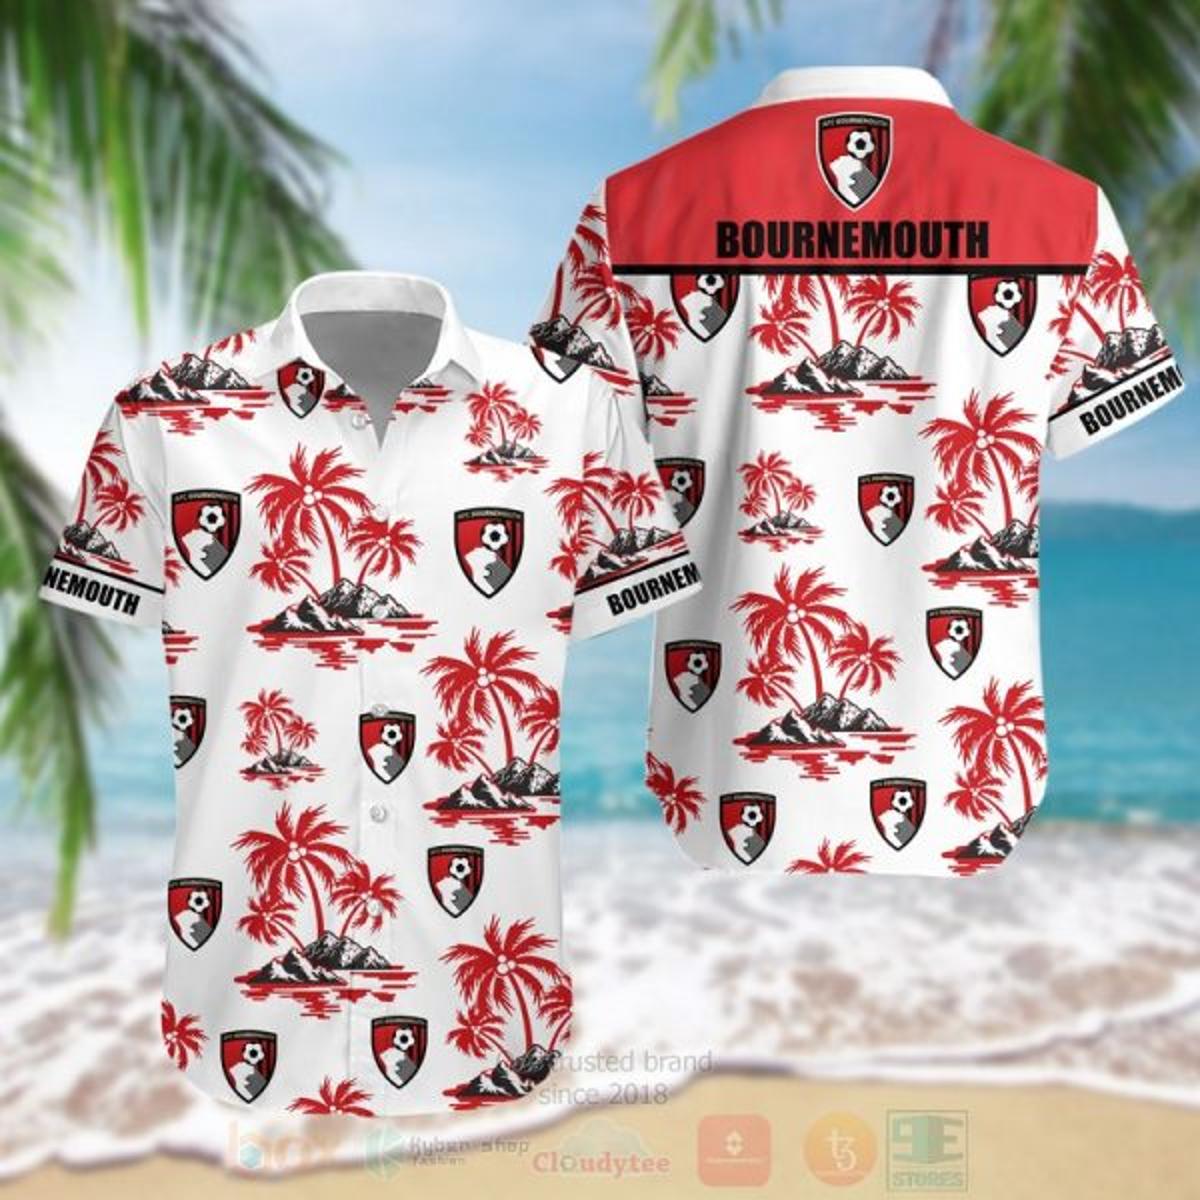 Afc Bournemouth White Red Floral Tropical Aloha Shirt Best Hawaiian Outfit For Fans